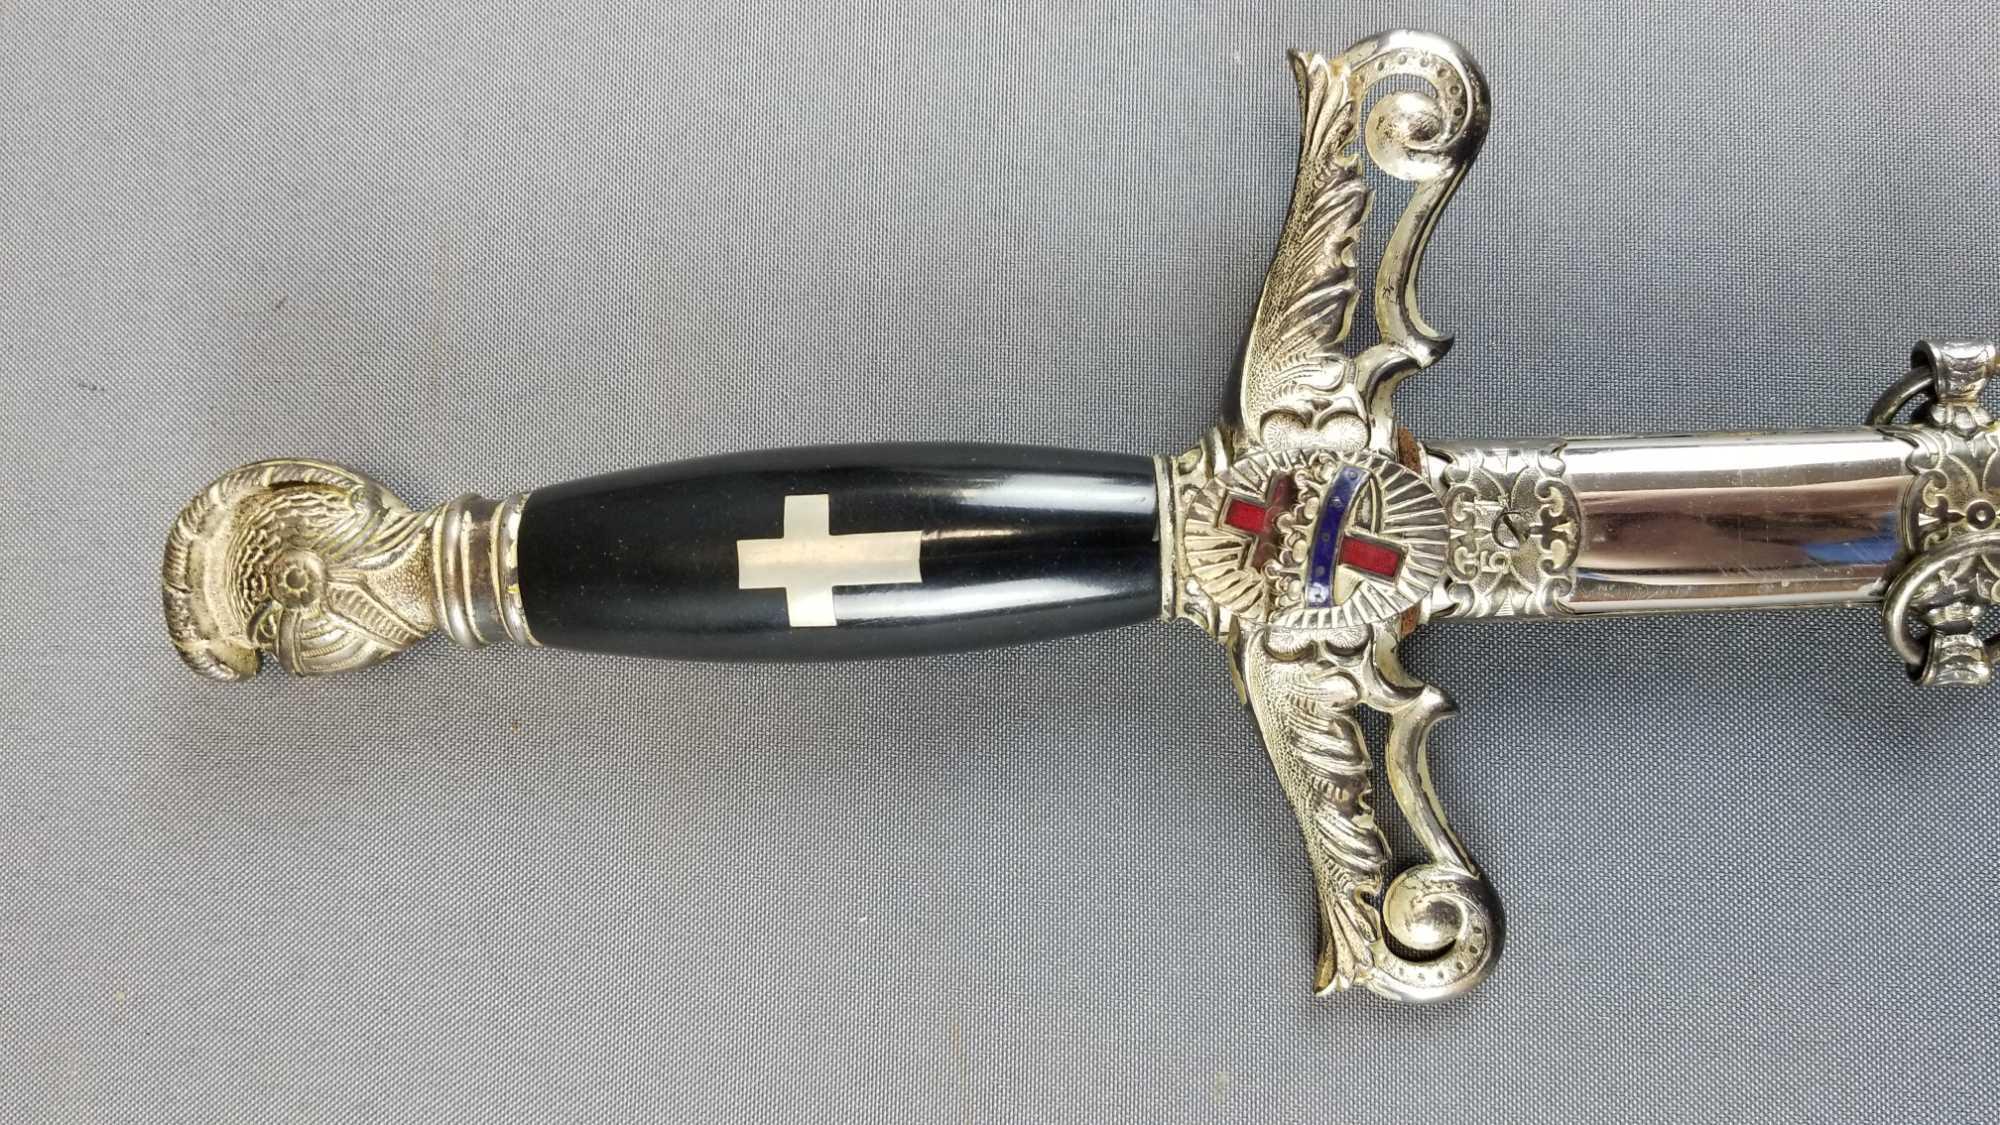 Vintage "Crown and Cross" Knights Templar Ceremonial Sword in Scabbard